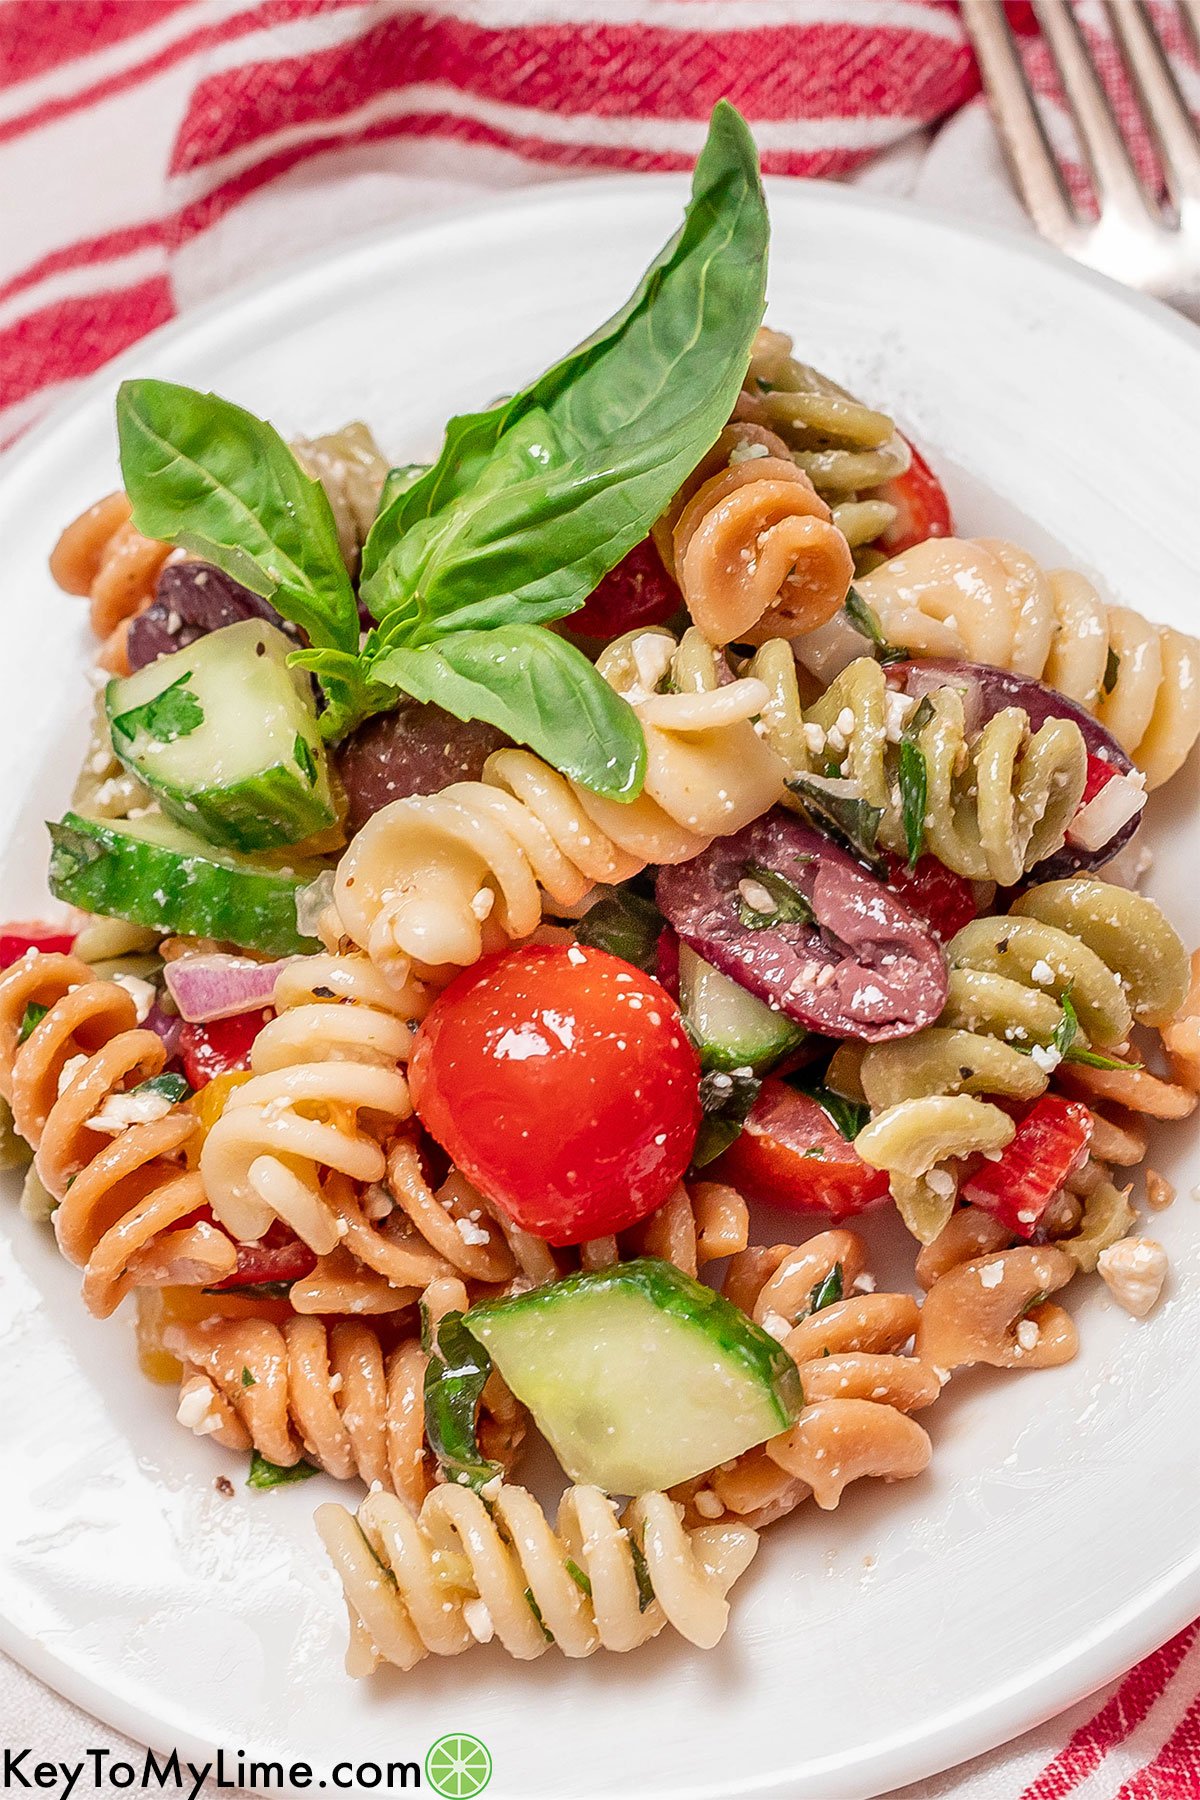 A close up image of a serving of pasta salad on a small plate garnished with fresh basil.